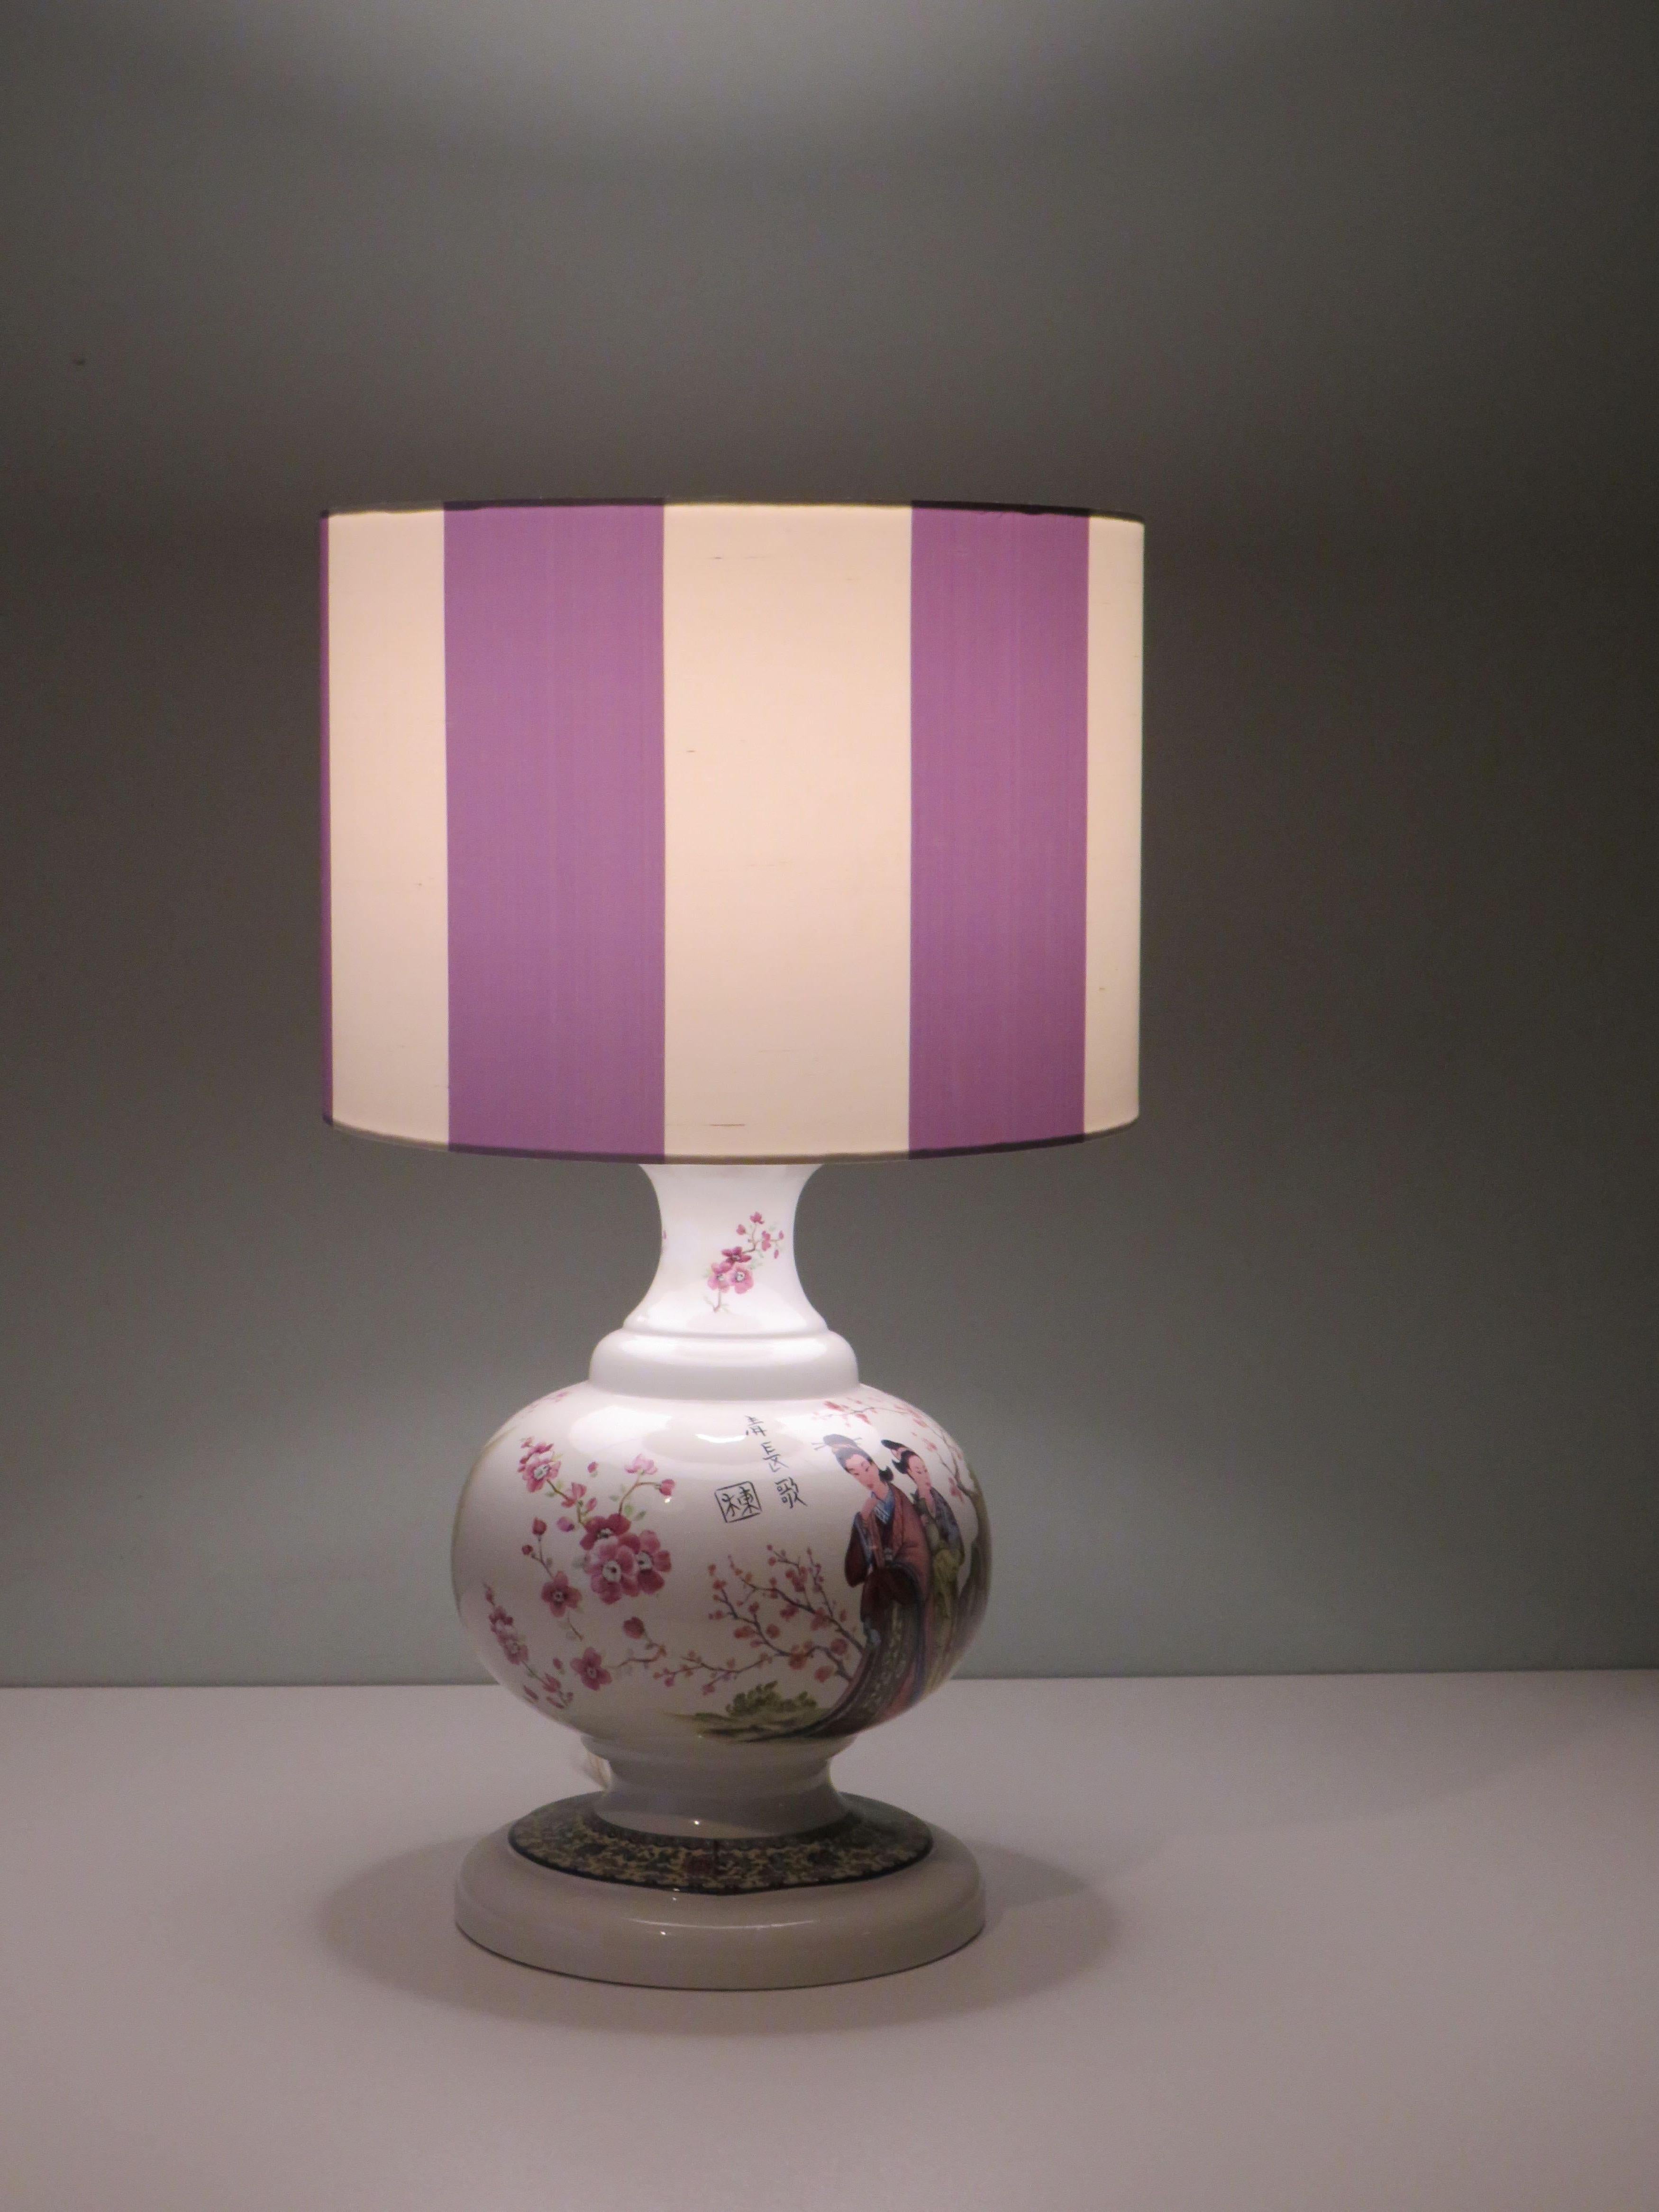 The lamp base has an attractive Oriental-inspired drawing of Japanese cherry tree and a lovely scene of geishas.
The table lamp has a new professionally handmade custom lampshade made of pure, wild silk in mauve and white wide vertical stripes. With